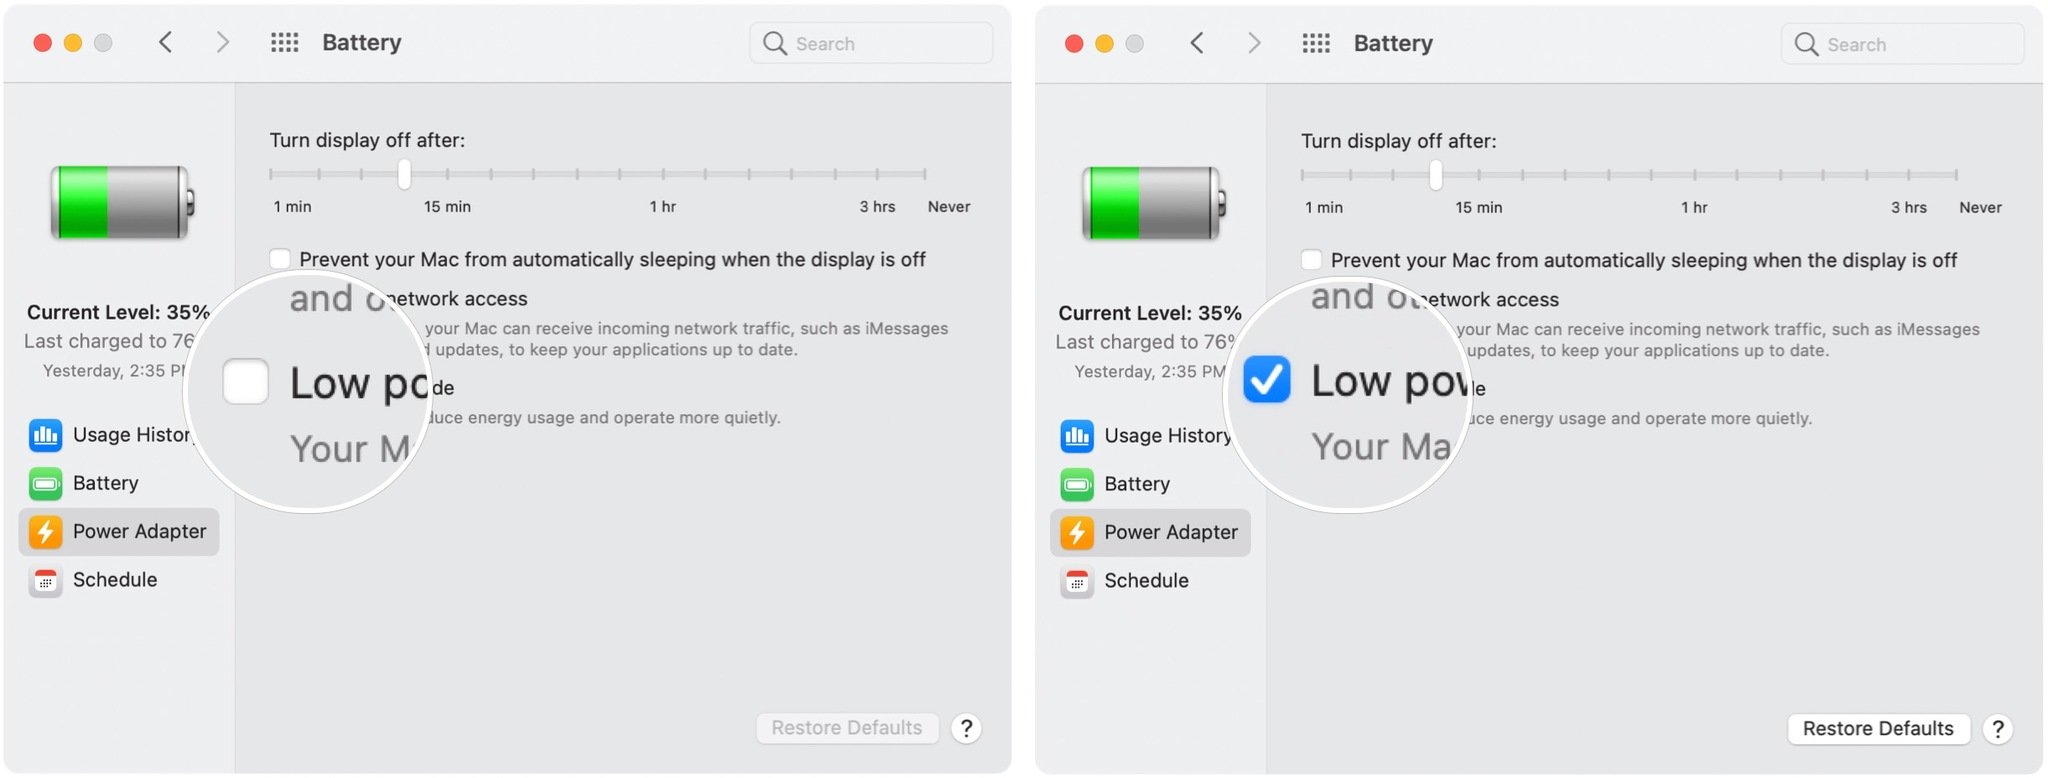 To use Low Power Mode with the power adapter, check the Low Power mode box.